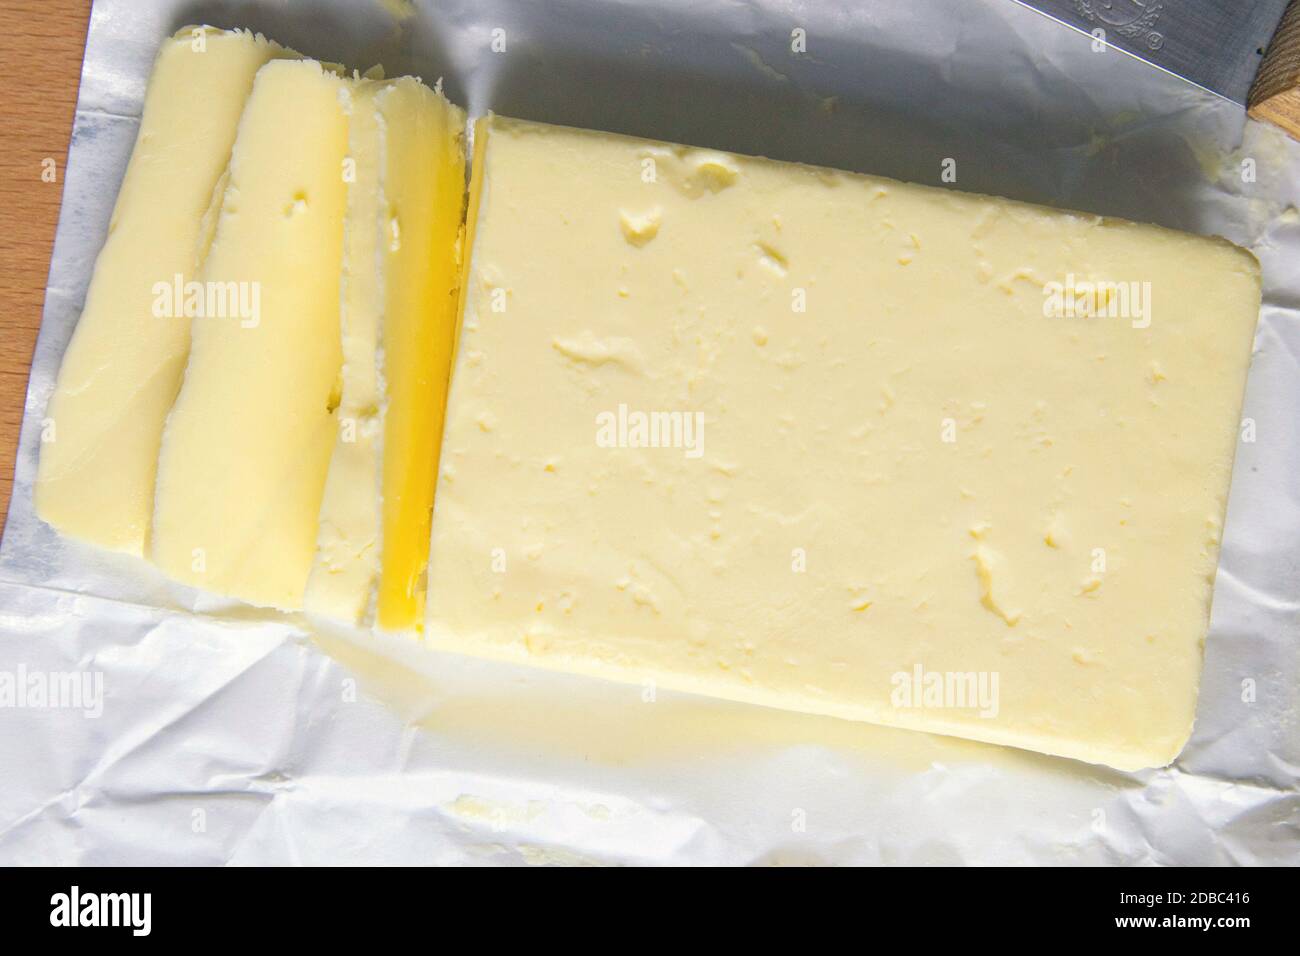 Piece of unwrapped butter on wooden table. Top views, close-up. Stock Photo